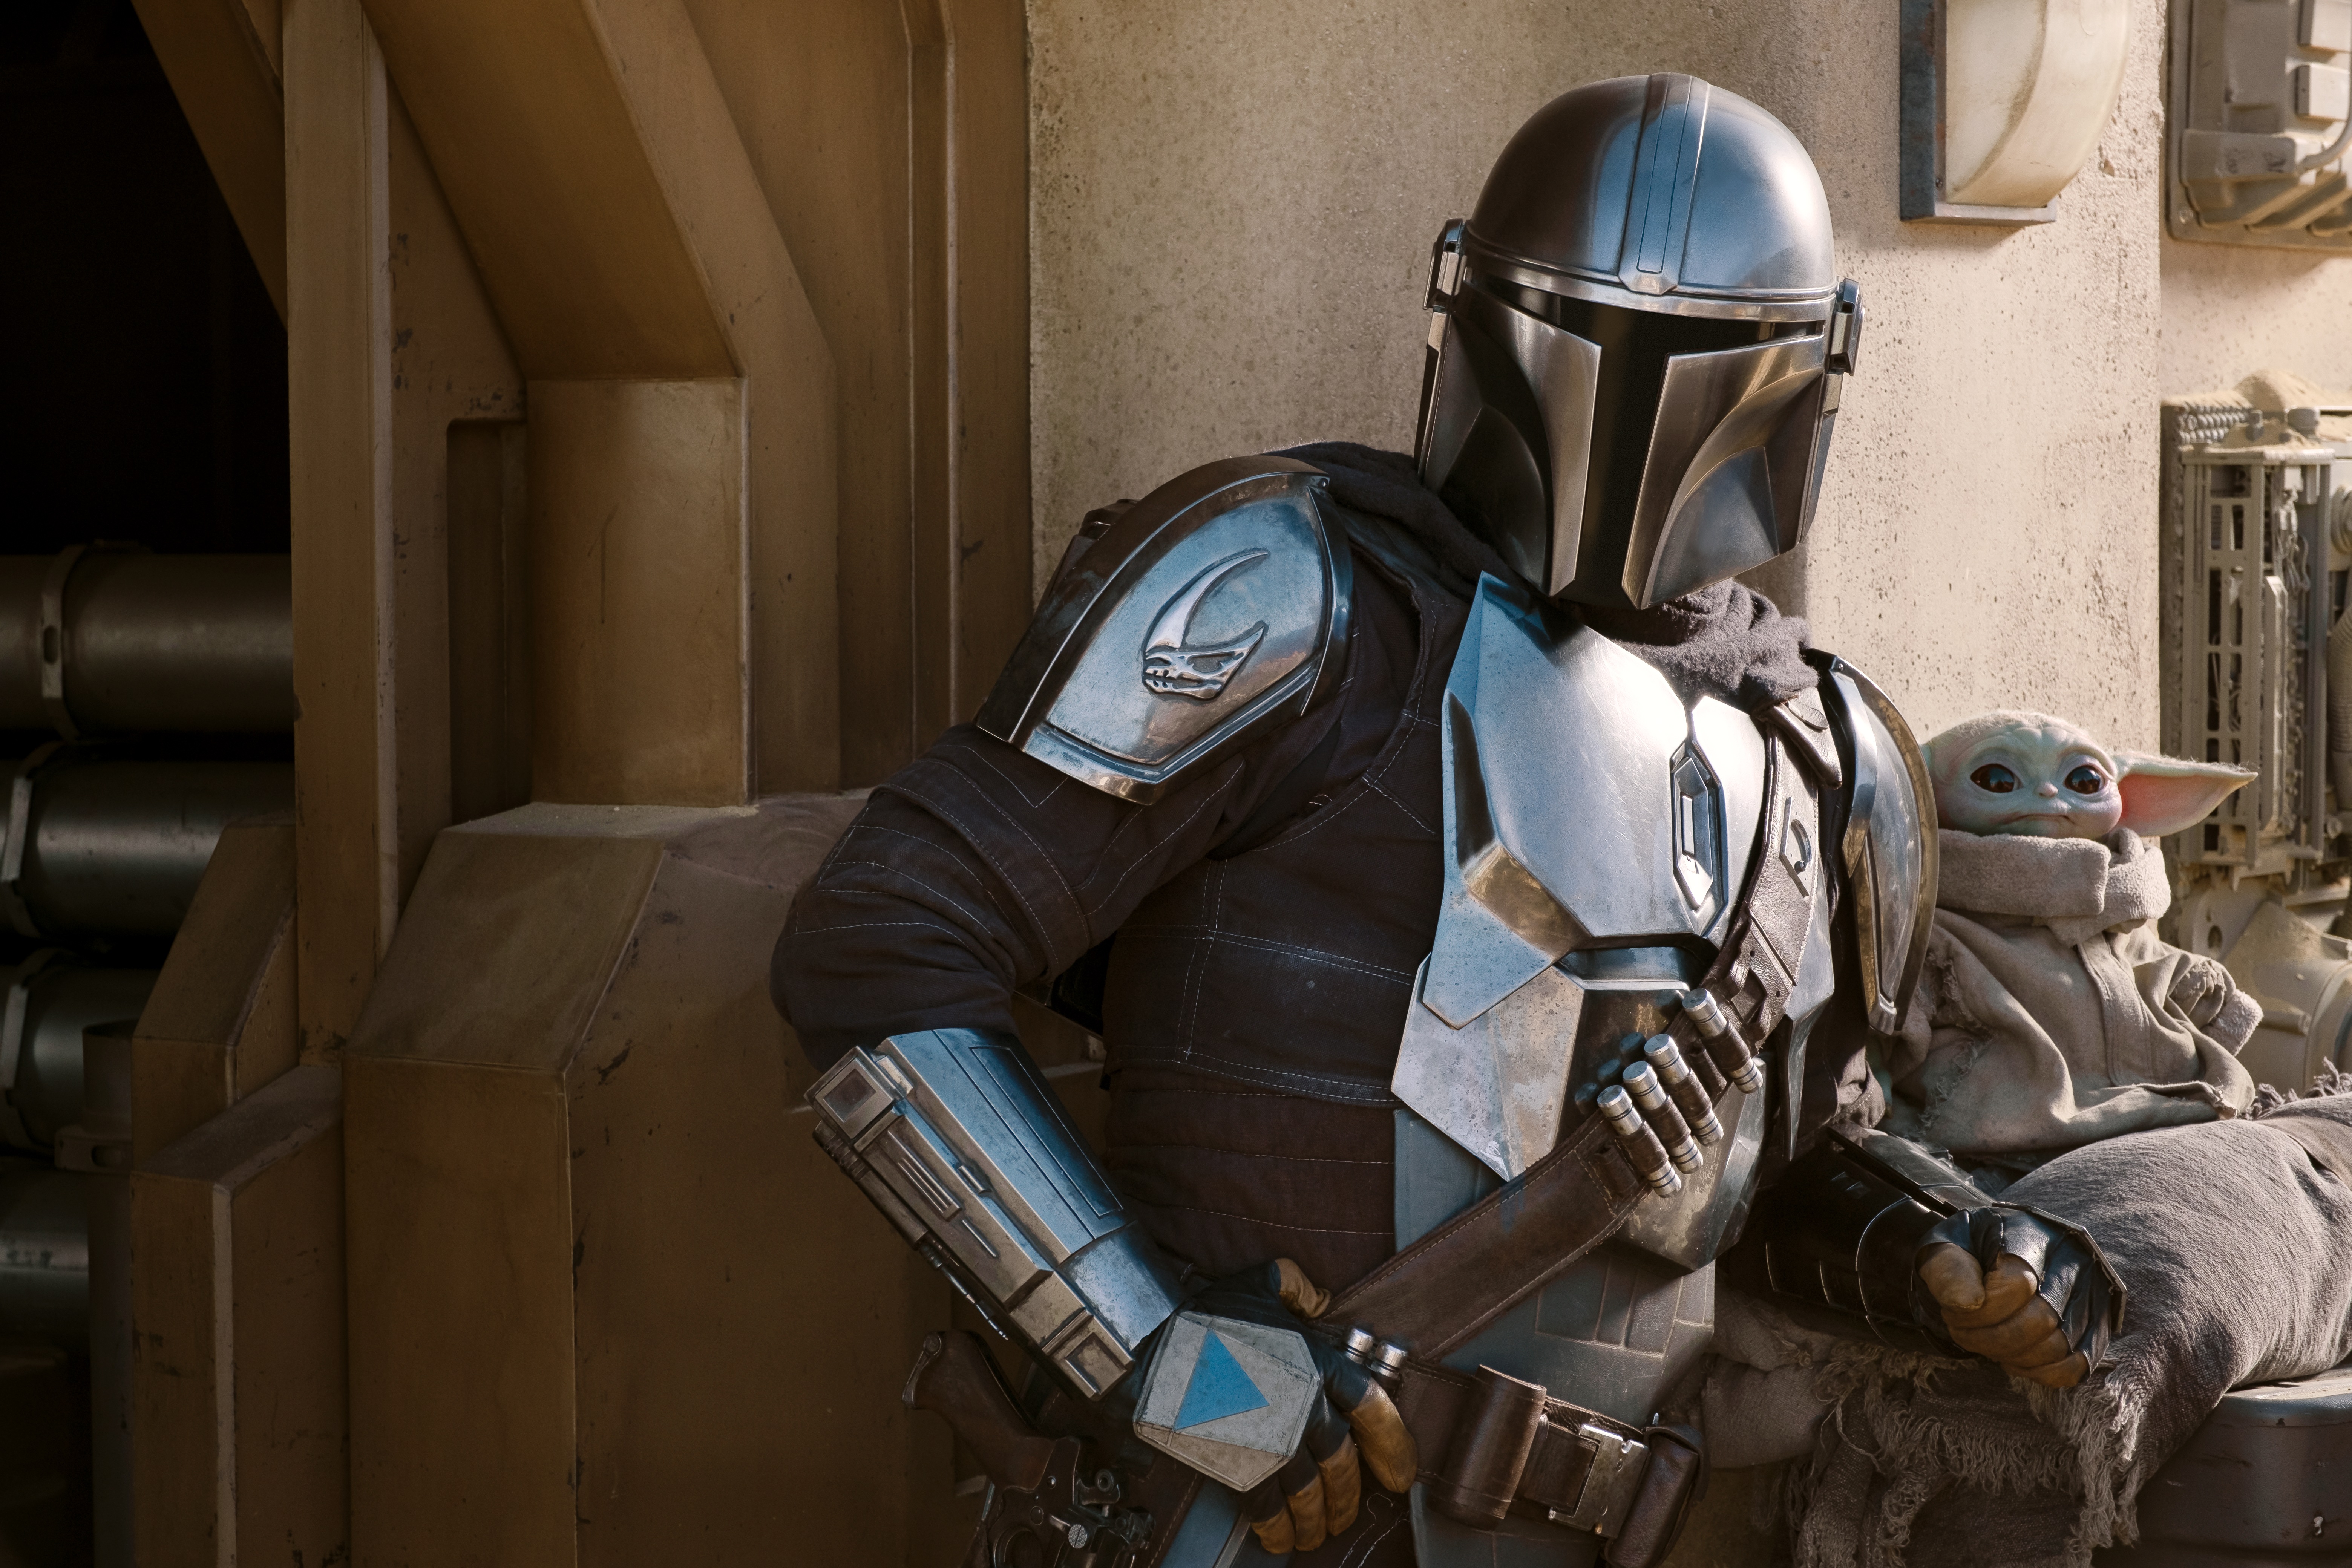 ‘The Mandalorian’ Just Dropped a Special Look Trailer for Season 2